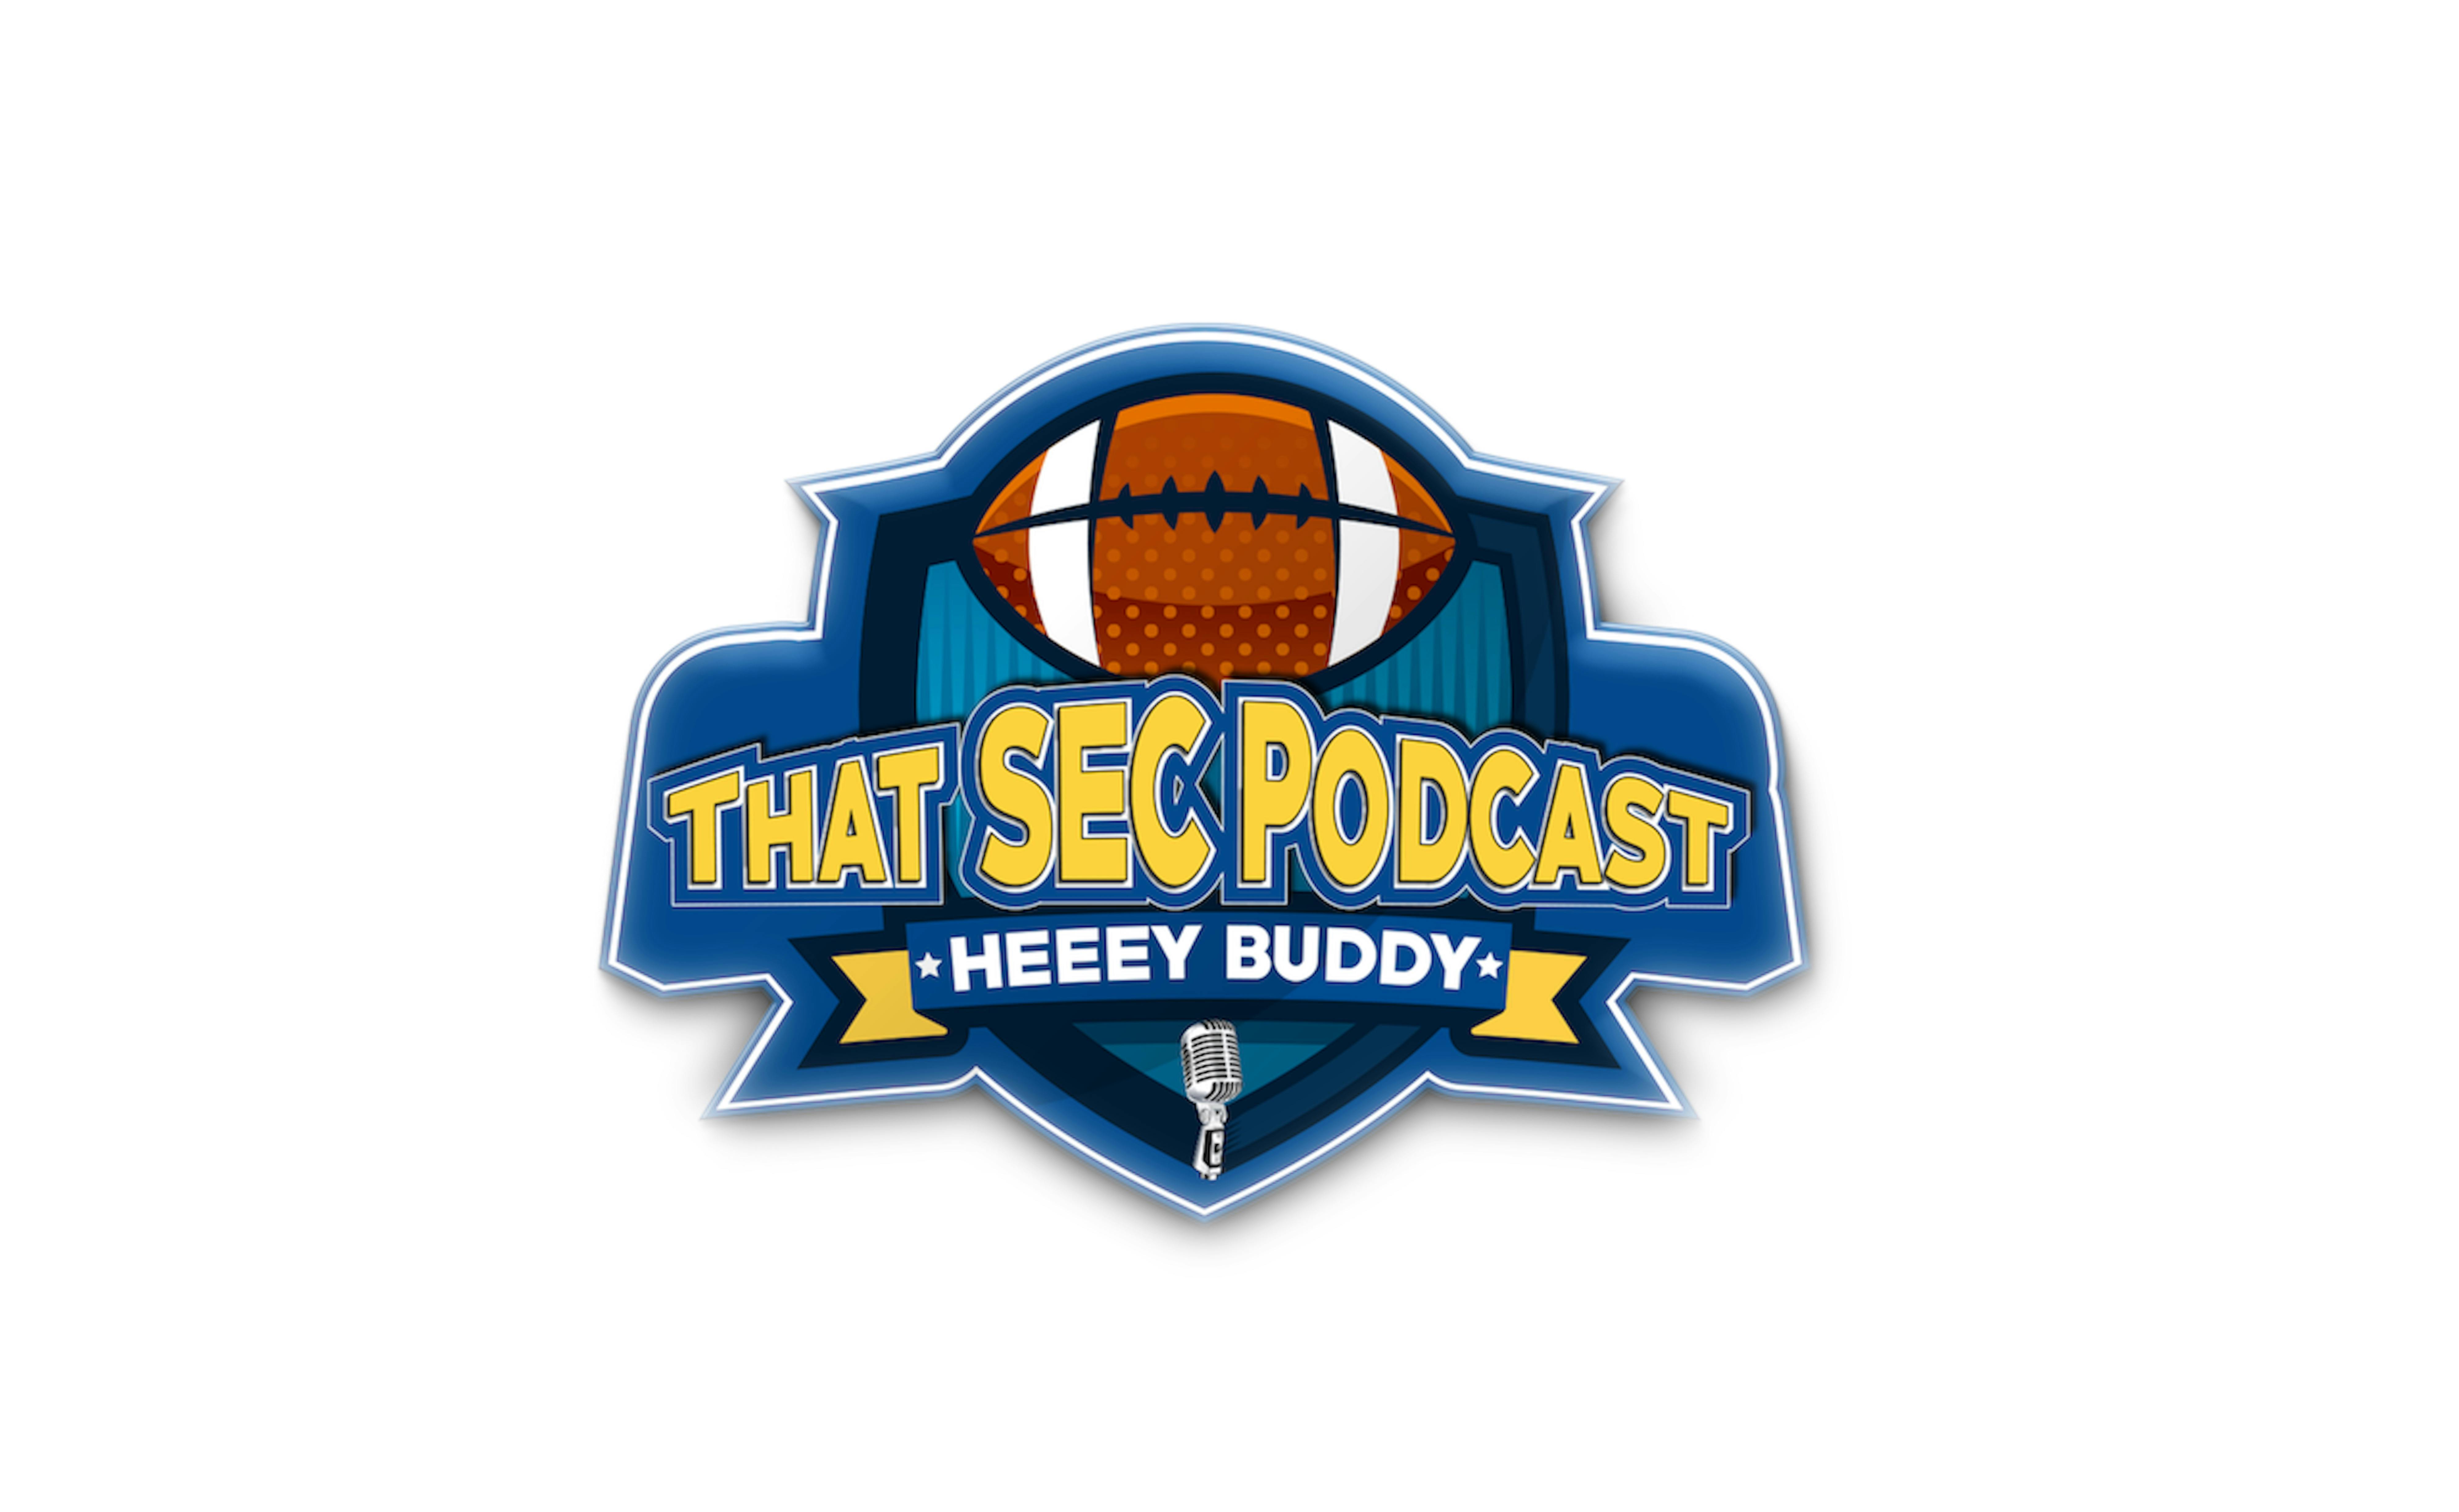 That SEC Football Podcast podcast show image